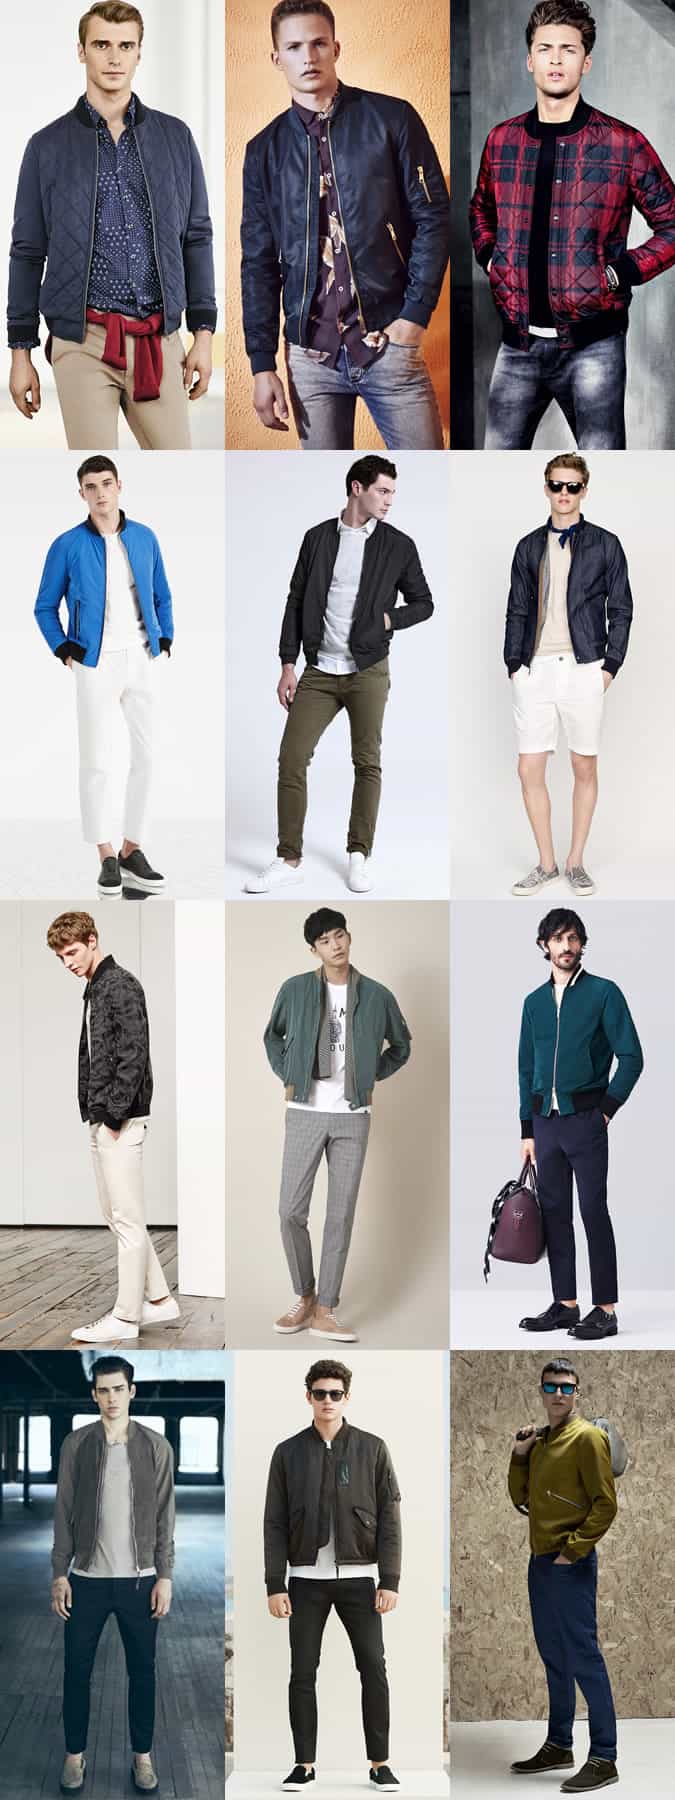 Key Spring Jackets For Men (And How To Wear Them) | FashionBeans